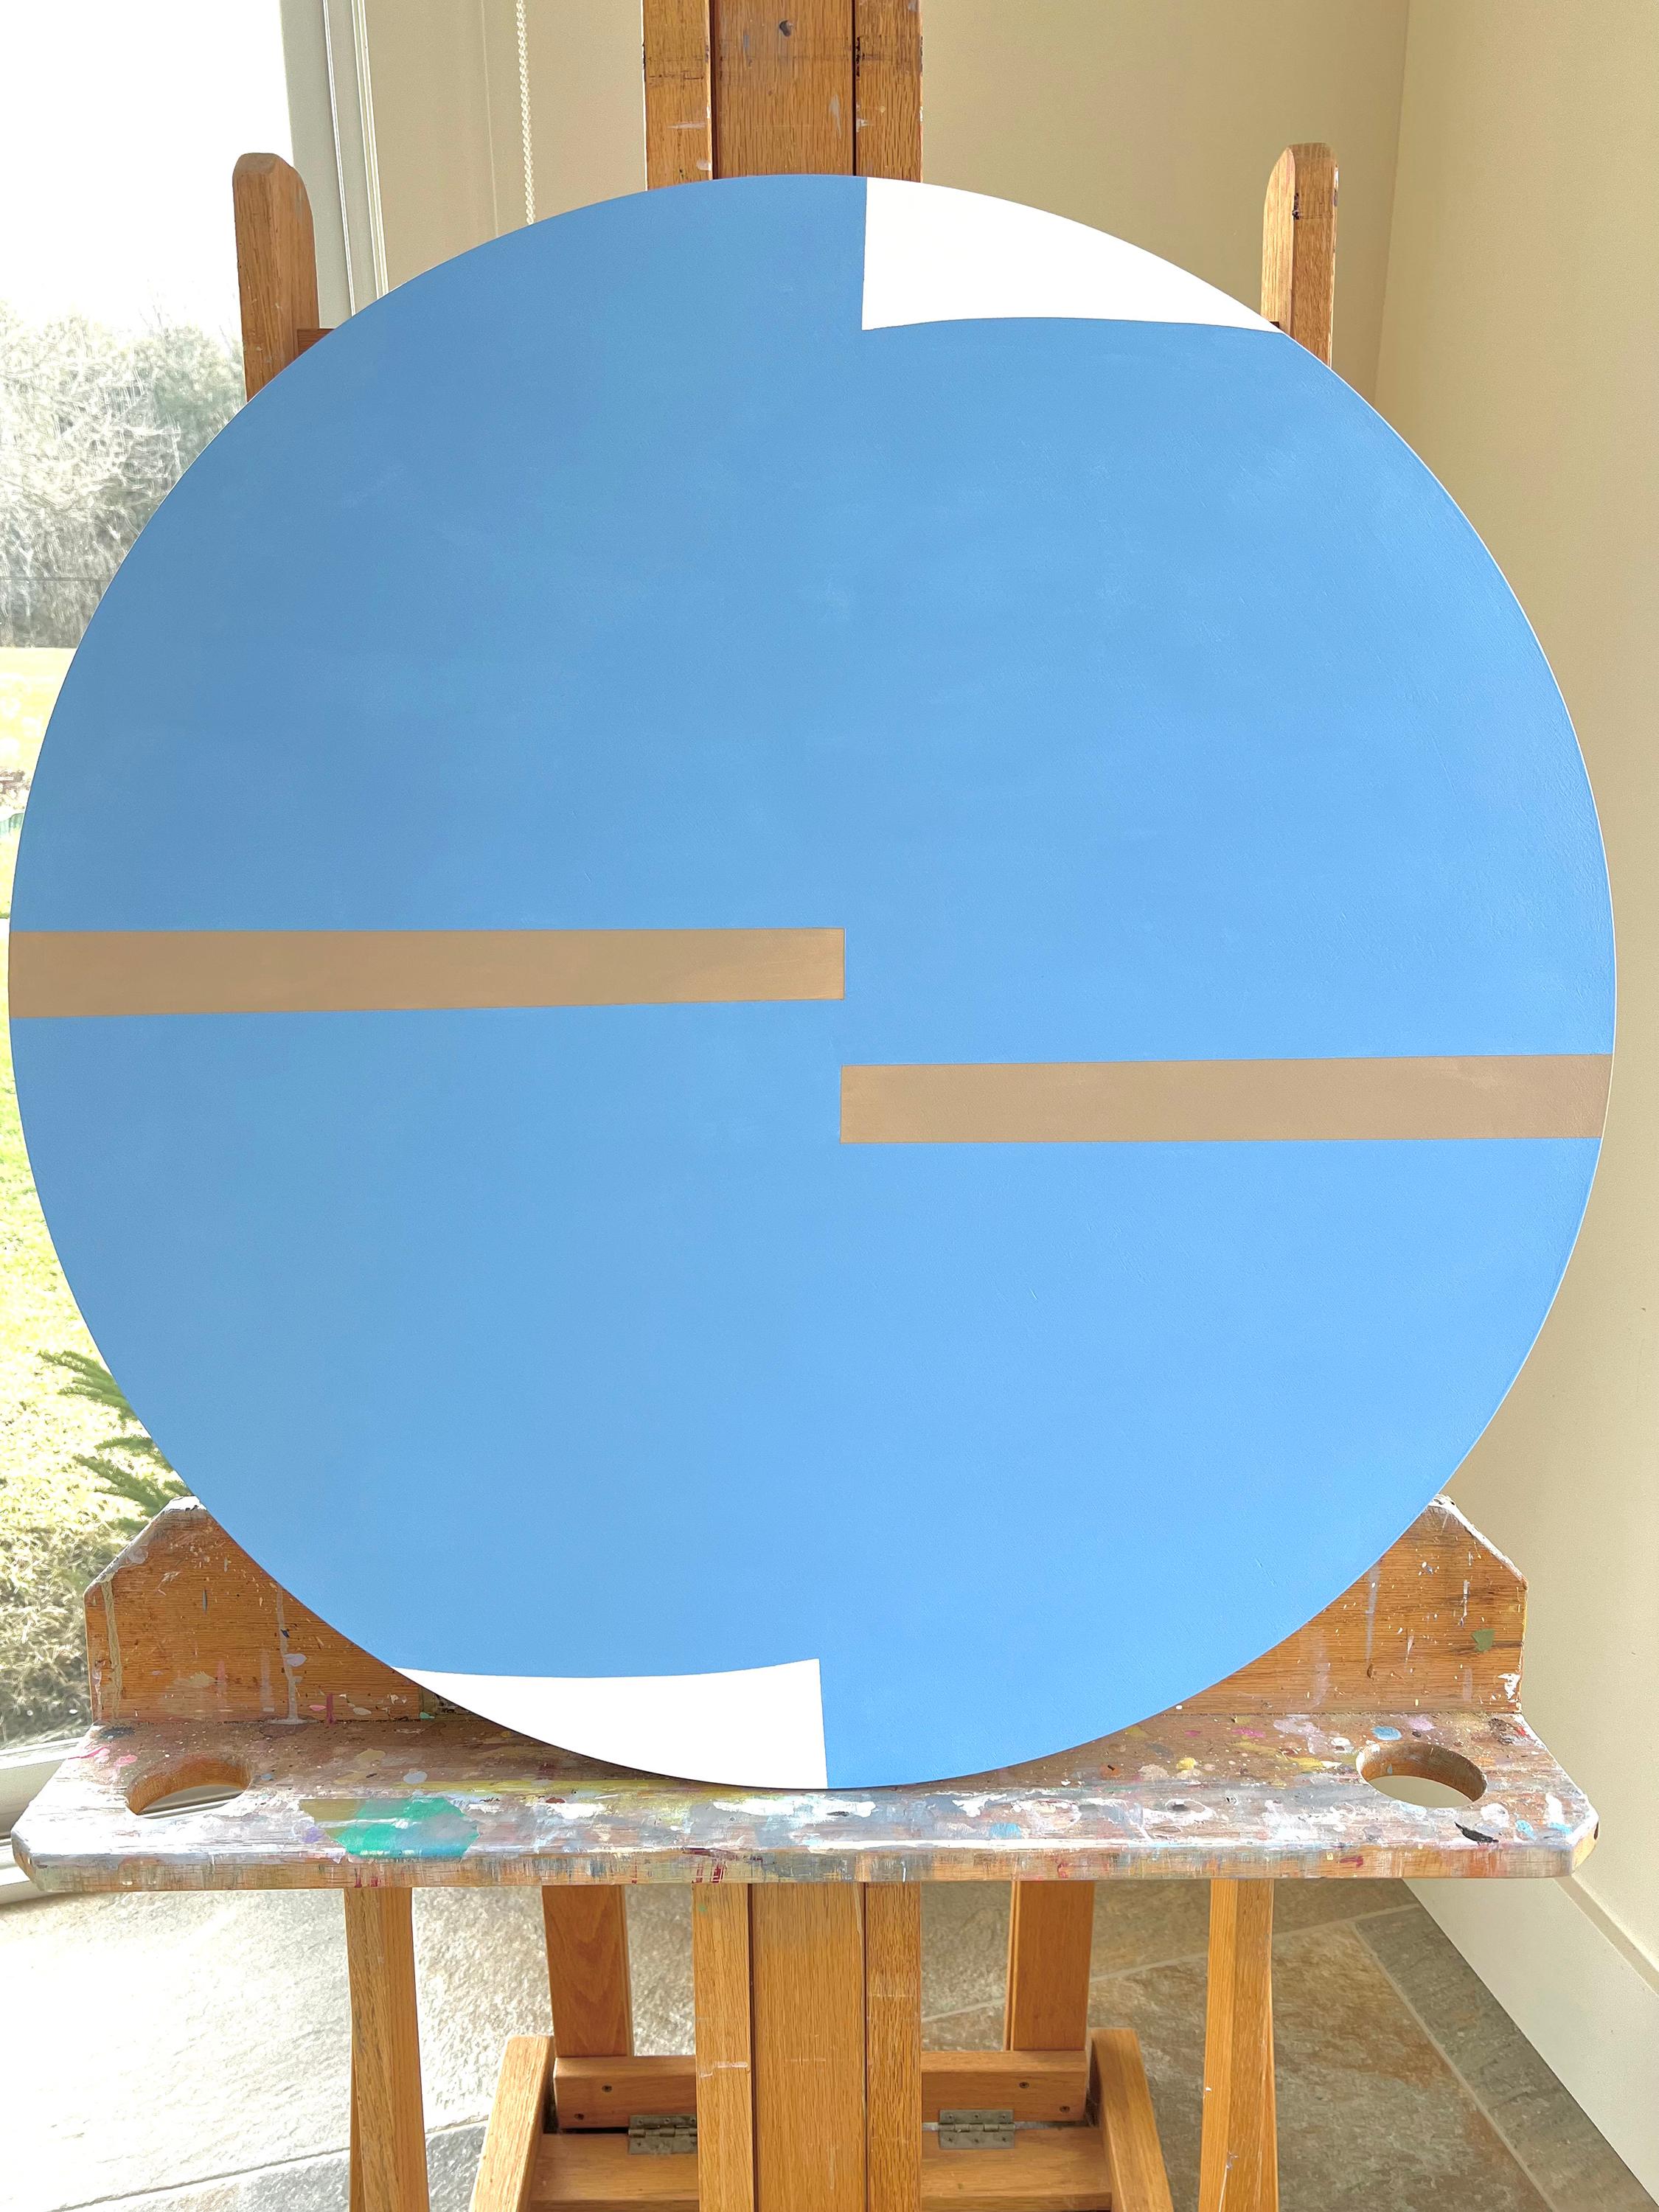 An abstract painting of a round shape, made in blue, creates a serene atmosphere reminiscent of the limitless sky. Its clean, geometric style lends a contemporary feel while giving the artwork a sense of structure and balance. With its soothing